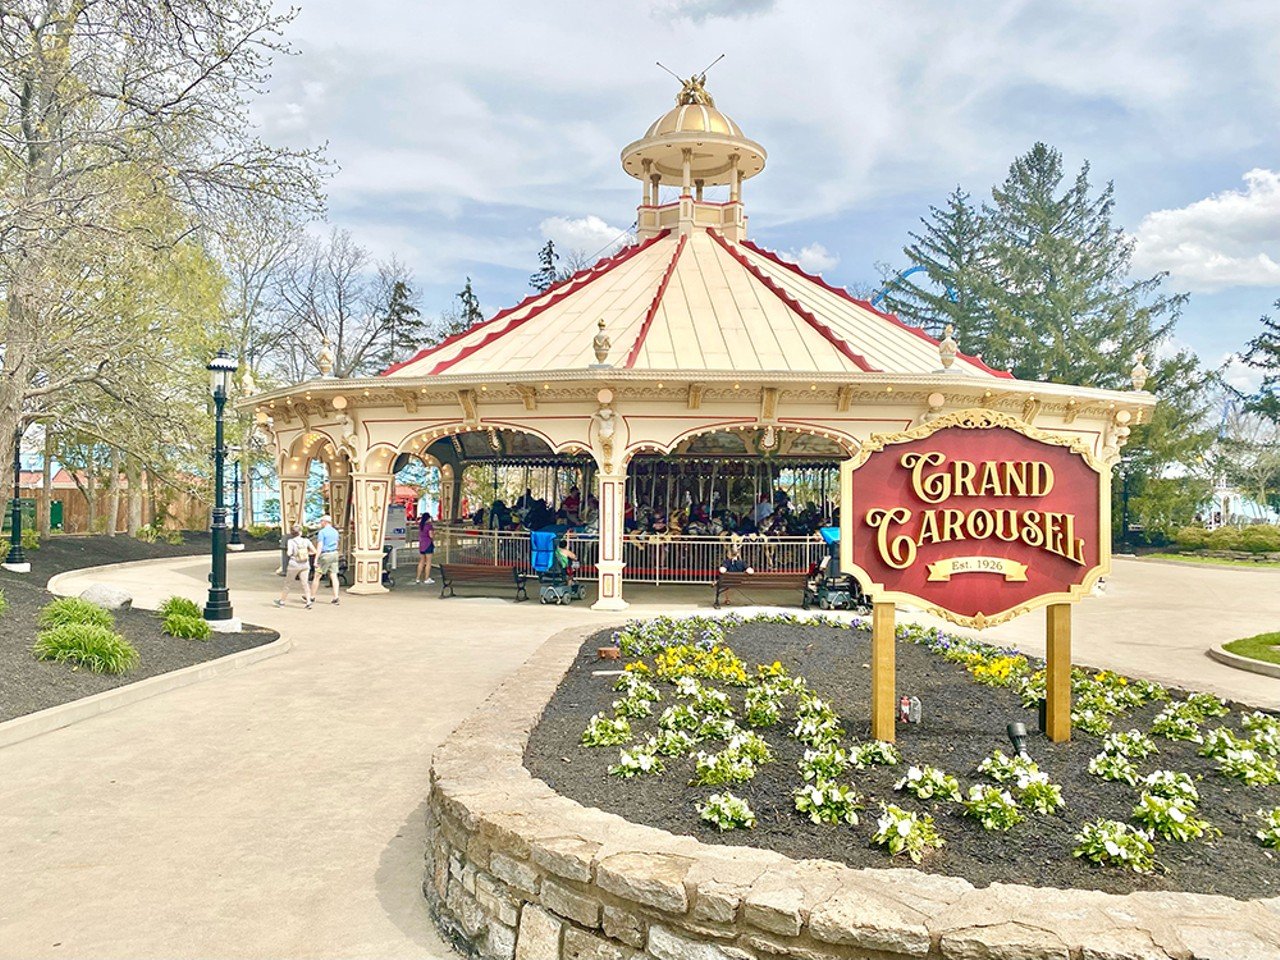 22. Grand Carousel 
More of a historical artifact than a ride, says the Kings Island fanatic. The Grand Carousel was built in 1926 and recently had its organ rebuilt in 2022. However, it is hard to deny its gorgeous setting and design, so it’s worth a spin in your downtime.